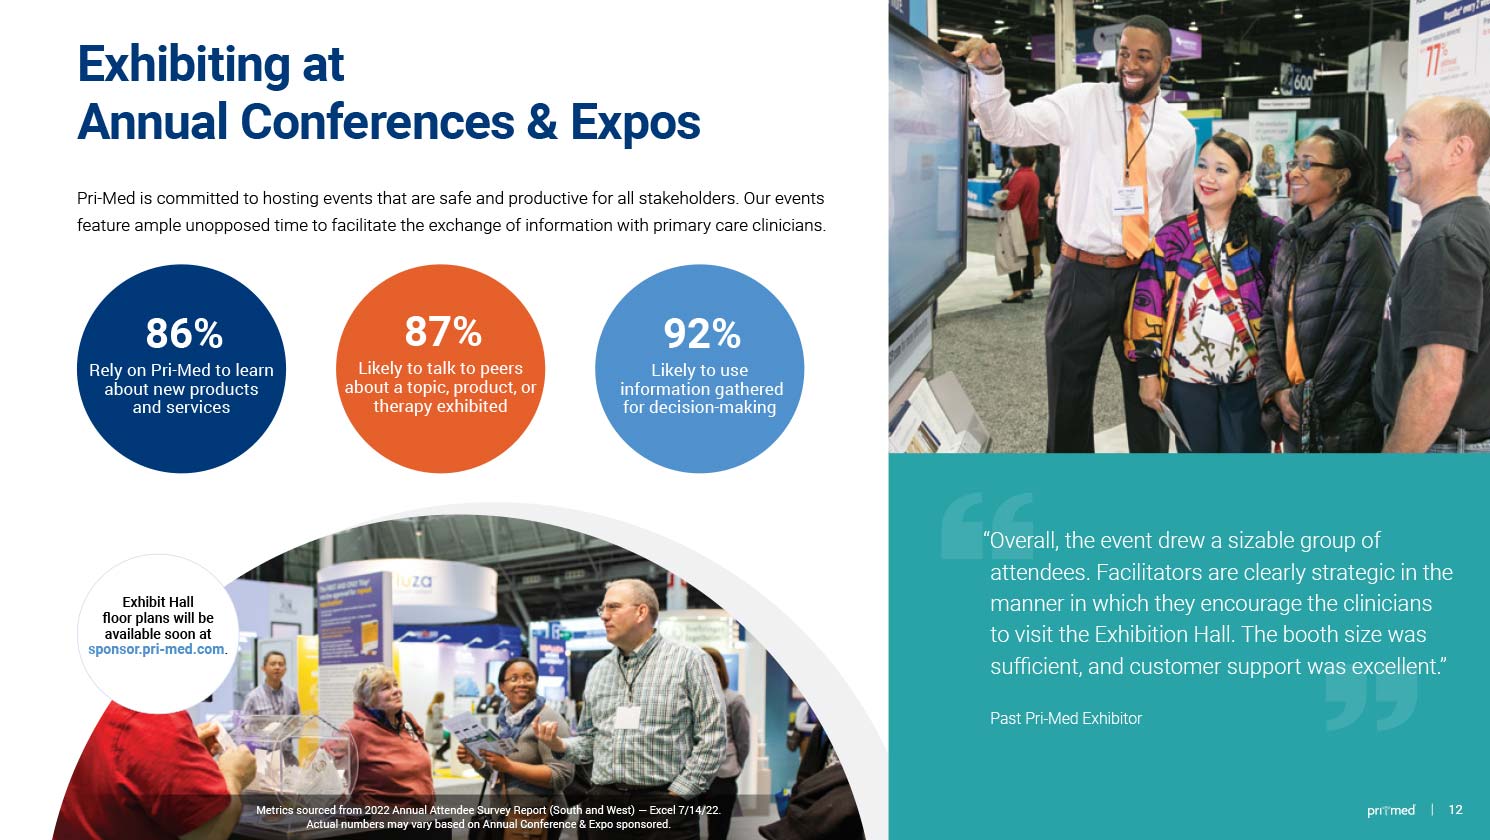 Sample Pri-Med Prospectus interior page with title Exhibiting at Annual Conferences & Expos"